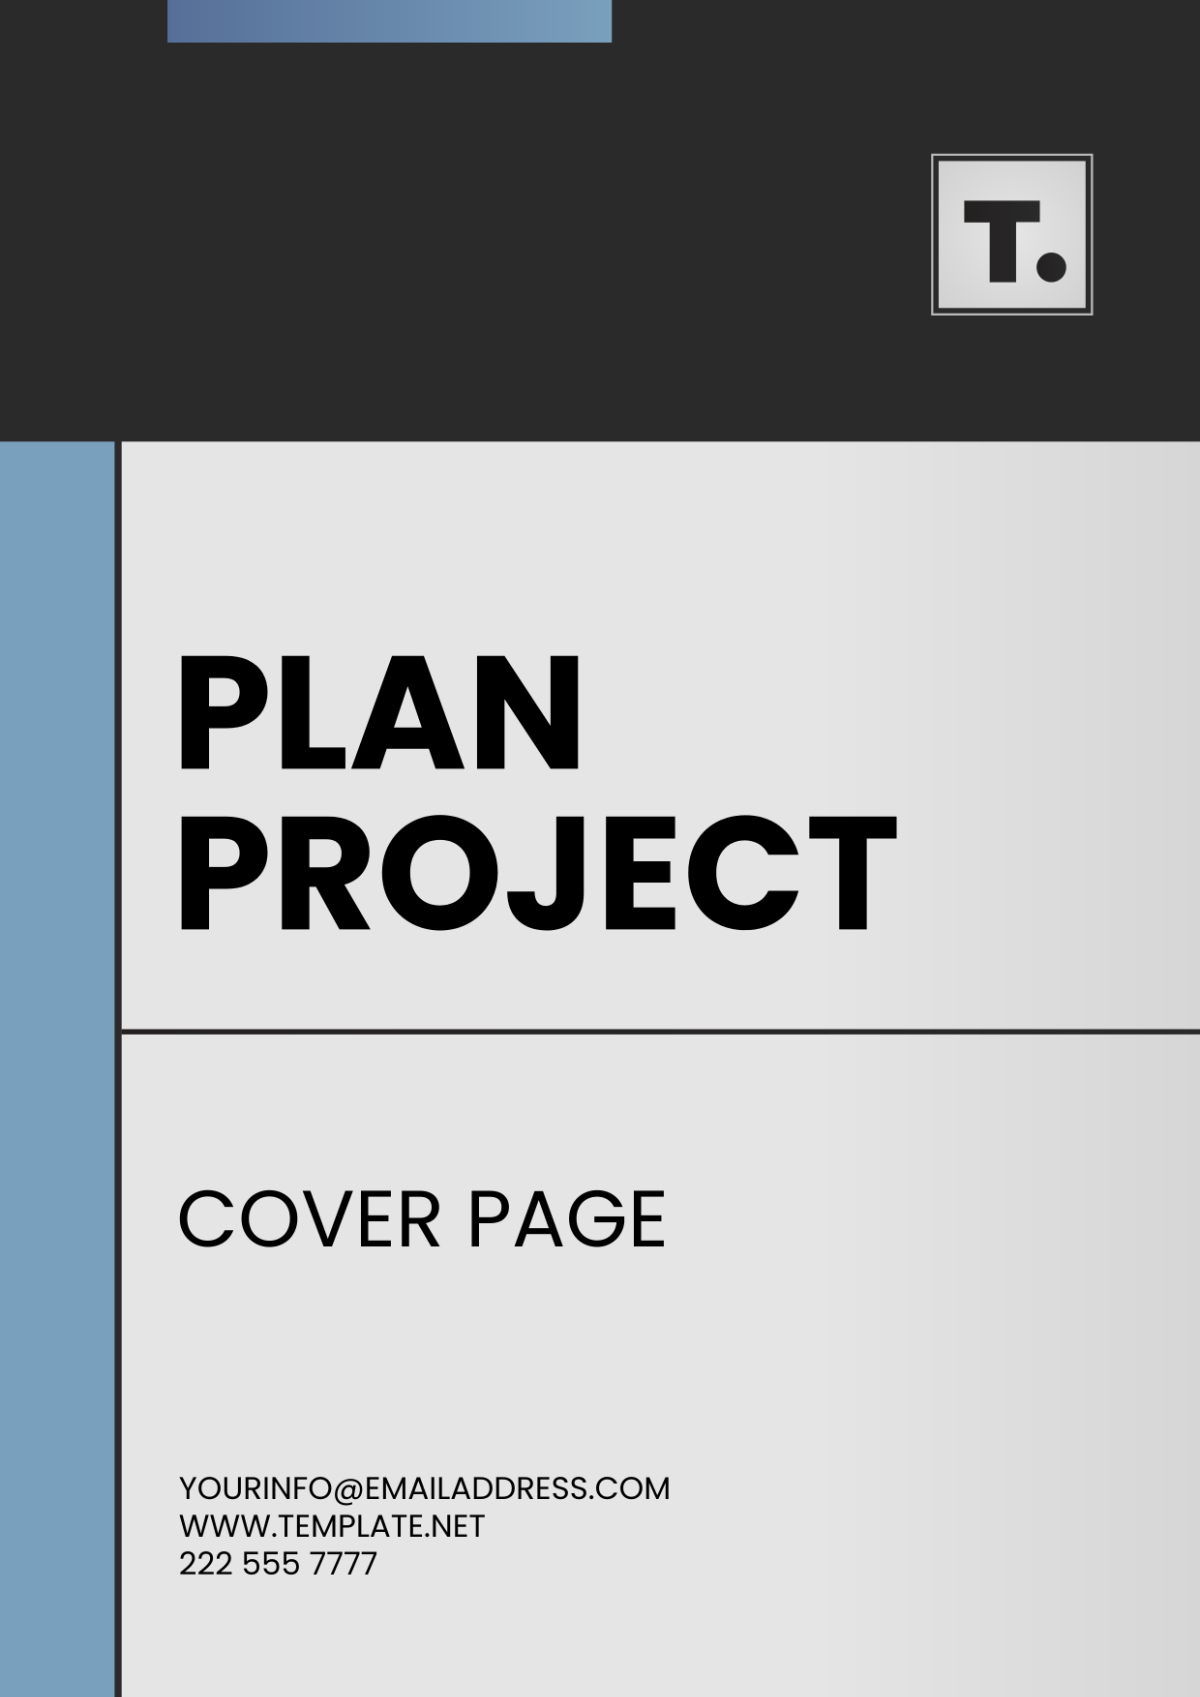 Plan Project Cover Page Template